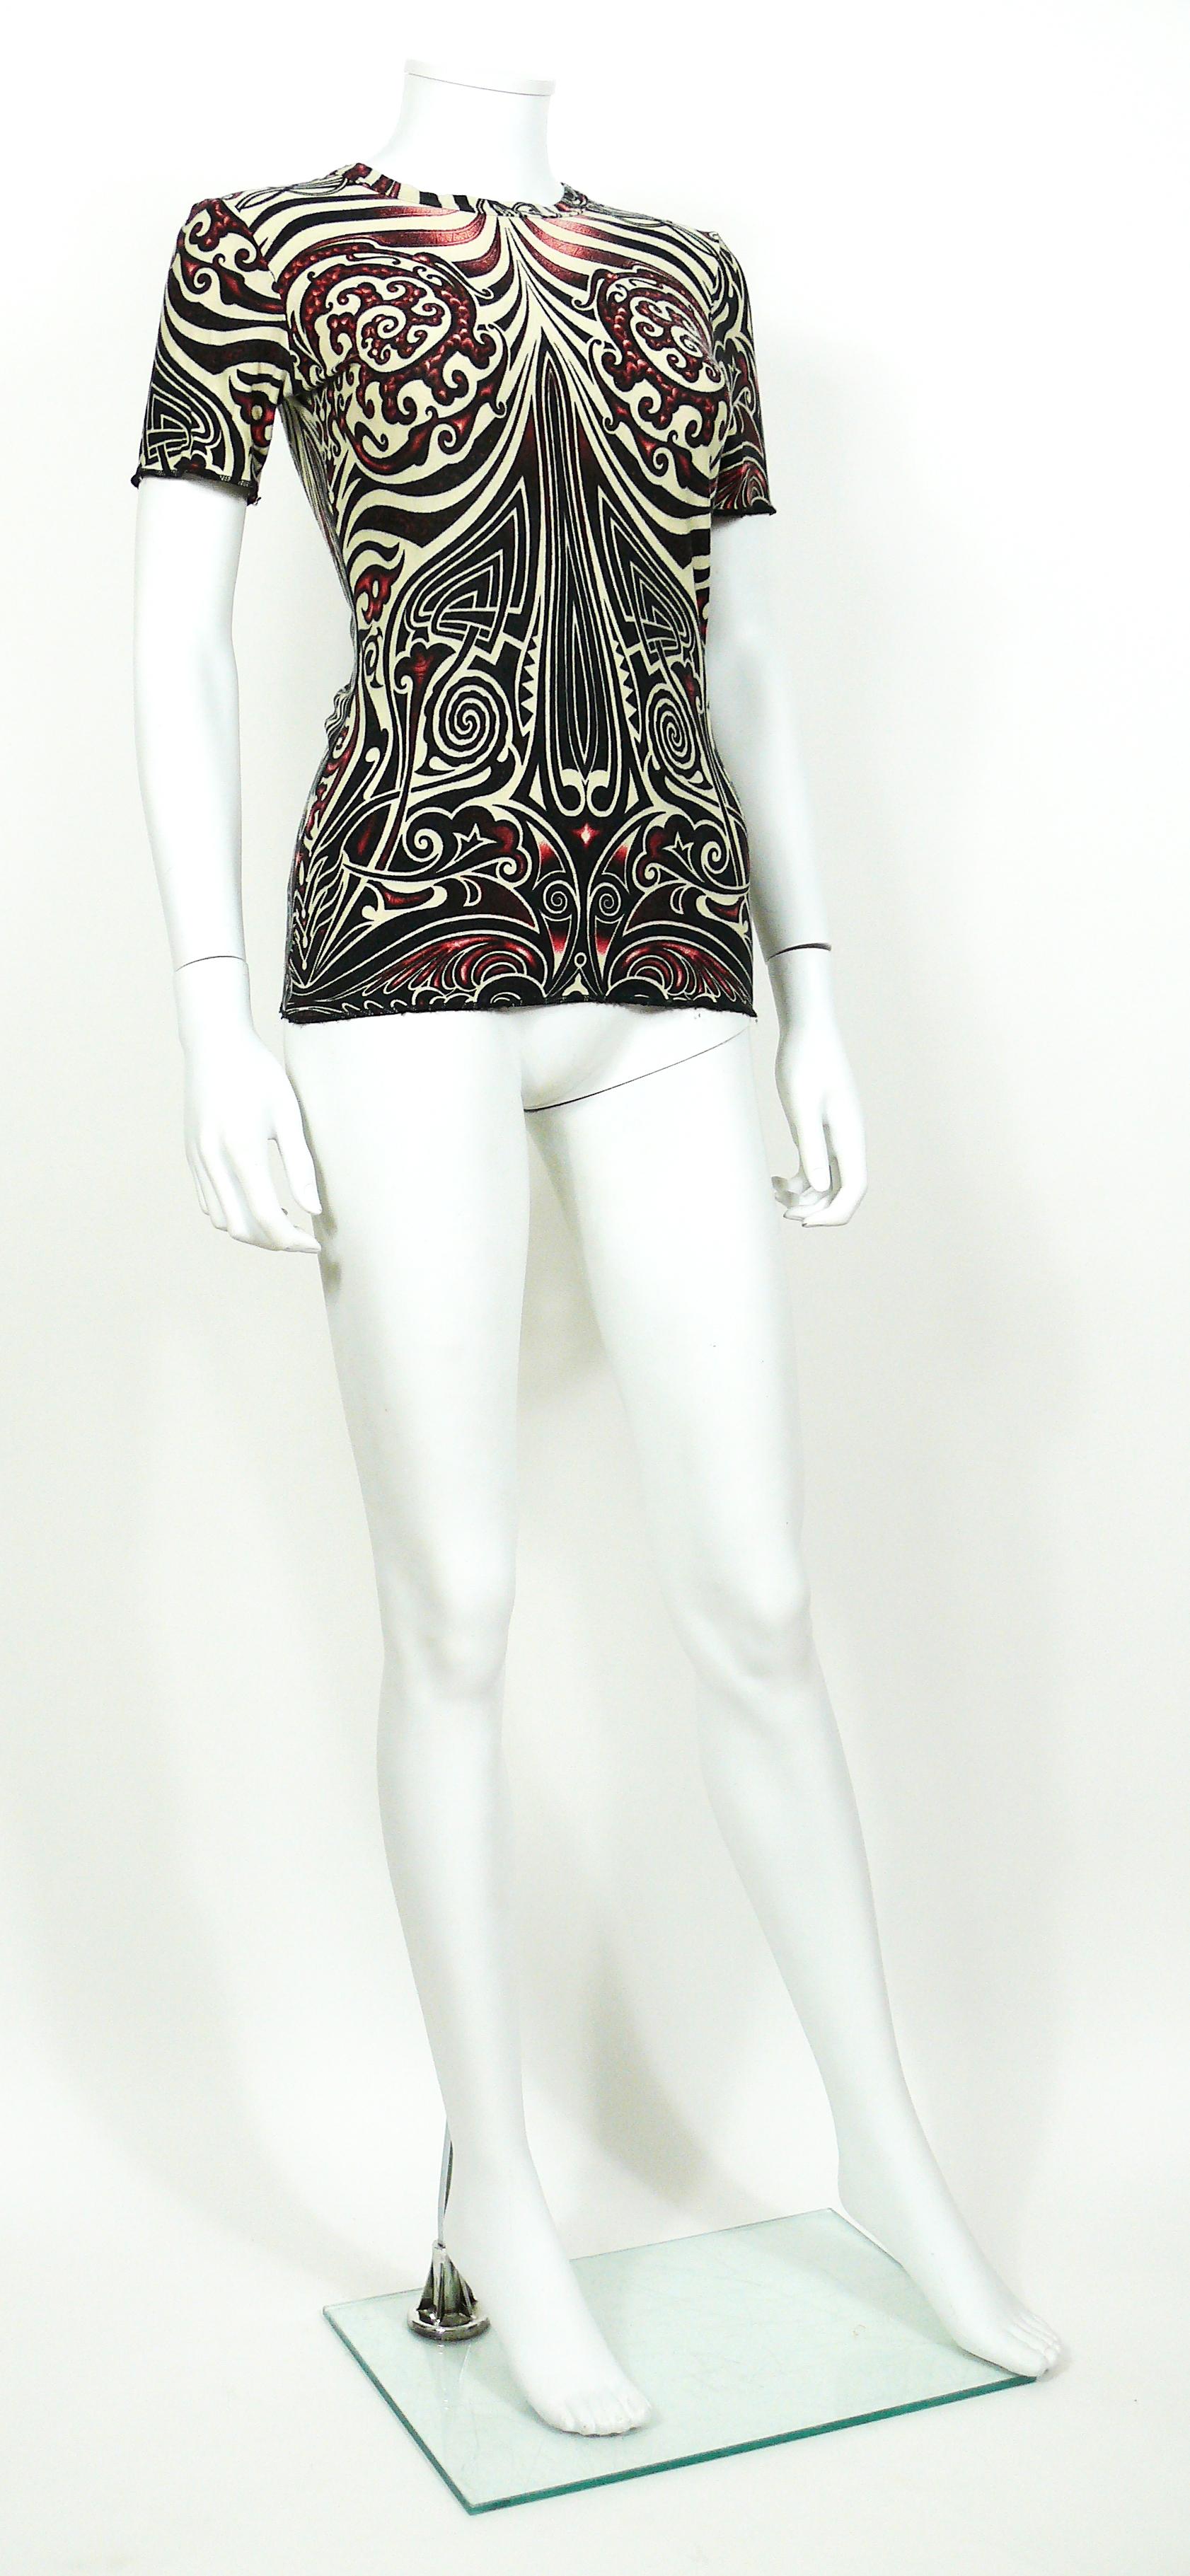 Jean Paul Gaultier vintage top featuring an opulent Aboriginal Maori tattoo print.

Stretchy material.

Label reads Gaultier Jeans.
Made in France.

Size tag reads : 38.

Indicative measurements taken laid flat and unstretched (double bust) :